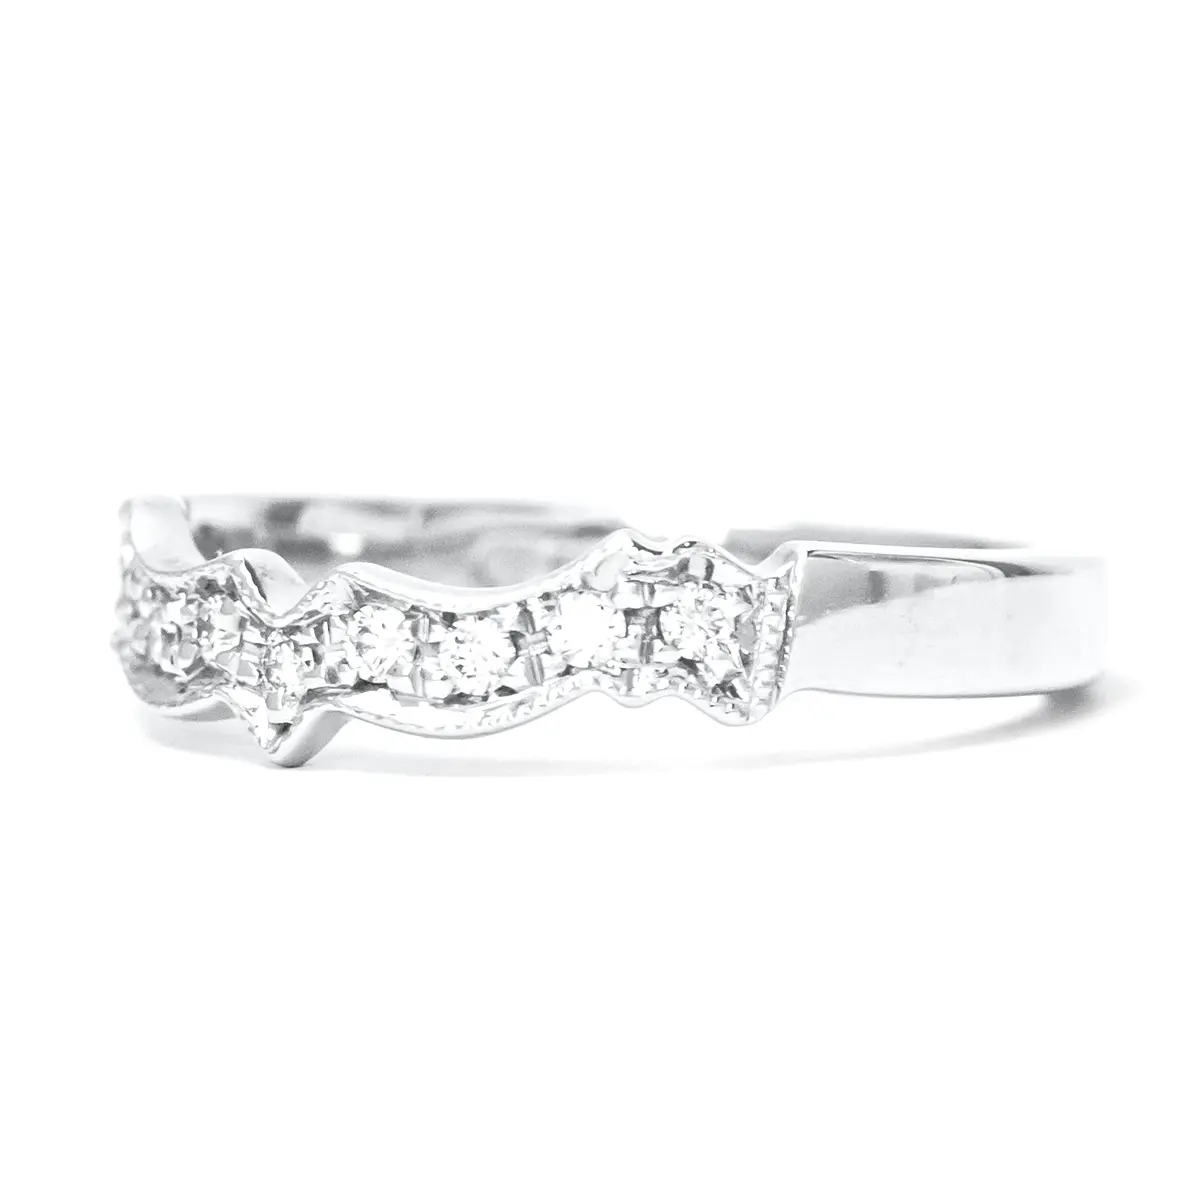 White Gold Claddagh Engagement Ring Set With Split-Heart Diamond, Centre Diamond Weight 0.34cts